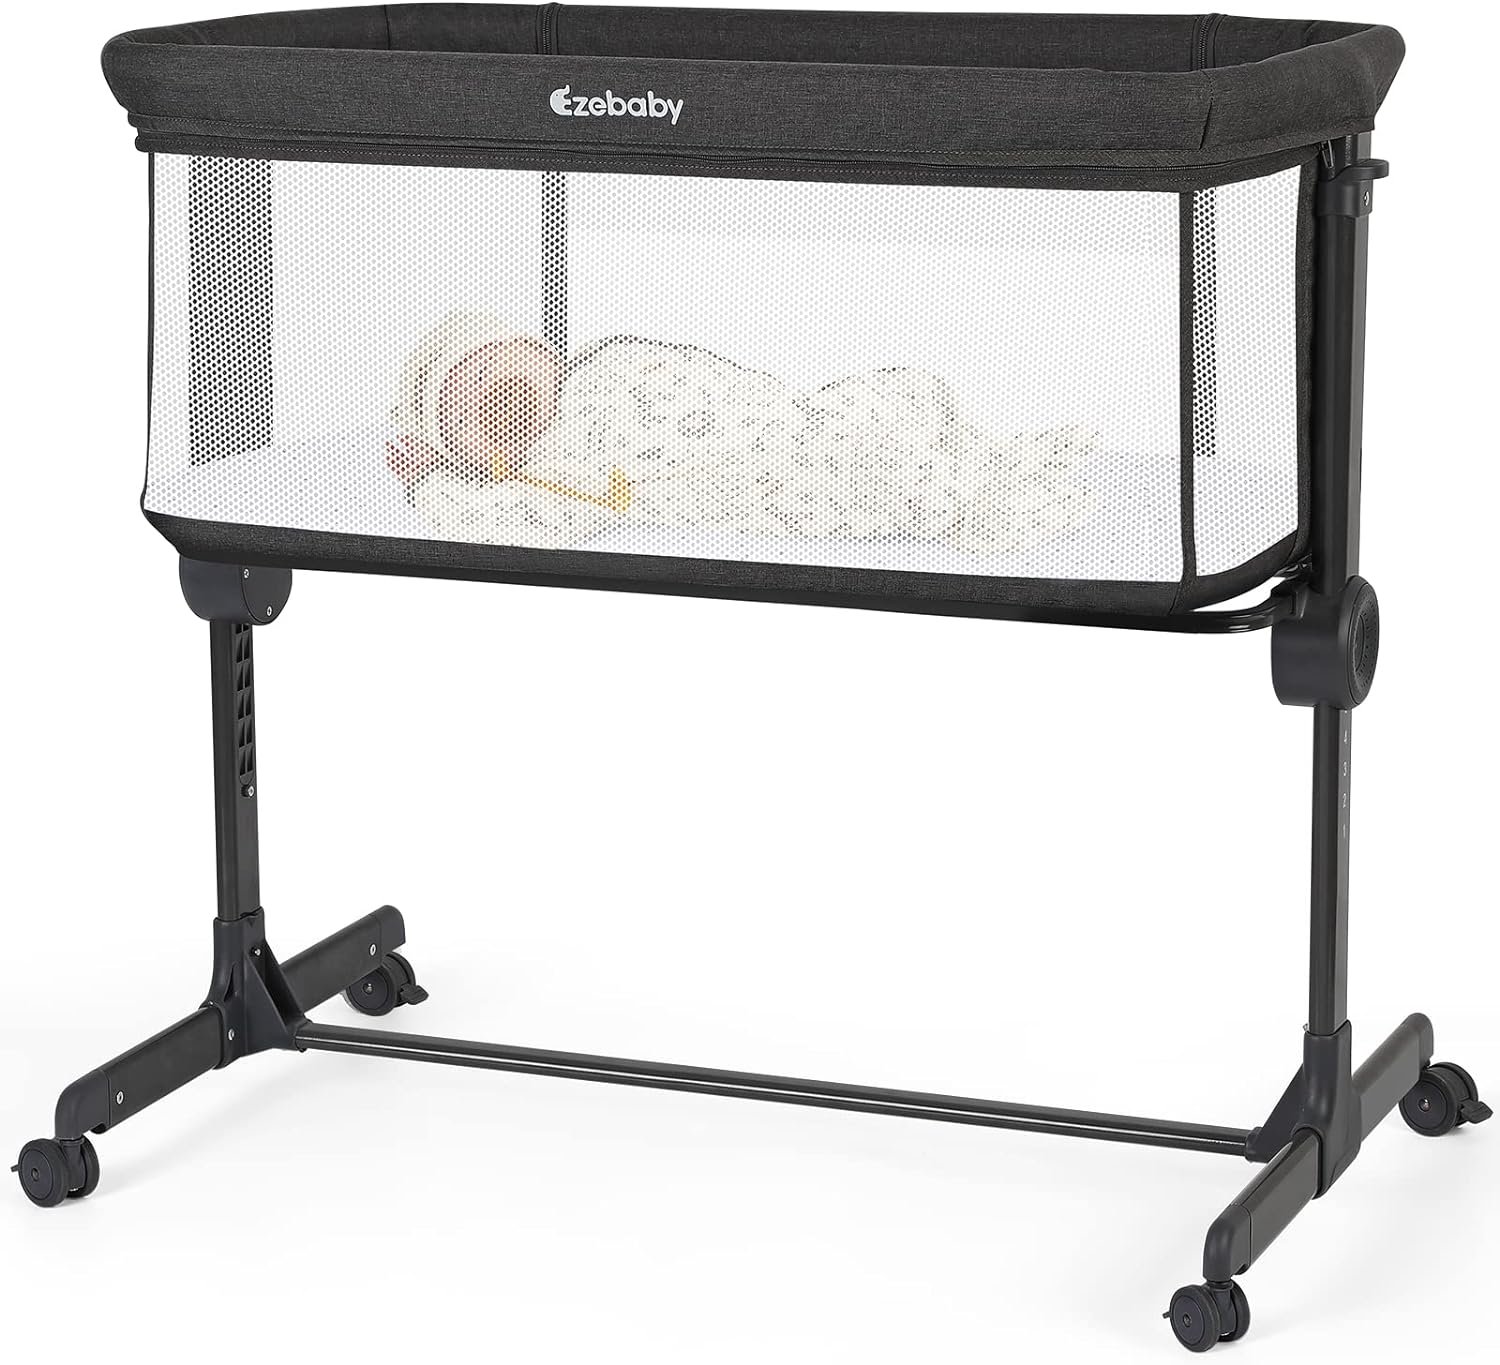 Ezebaby Baby Bassinet Review